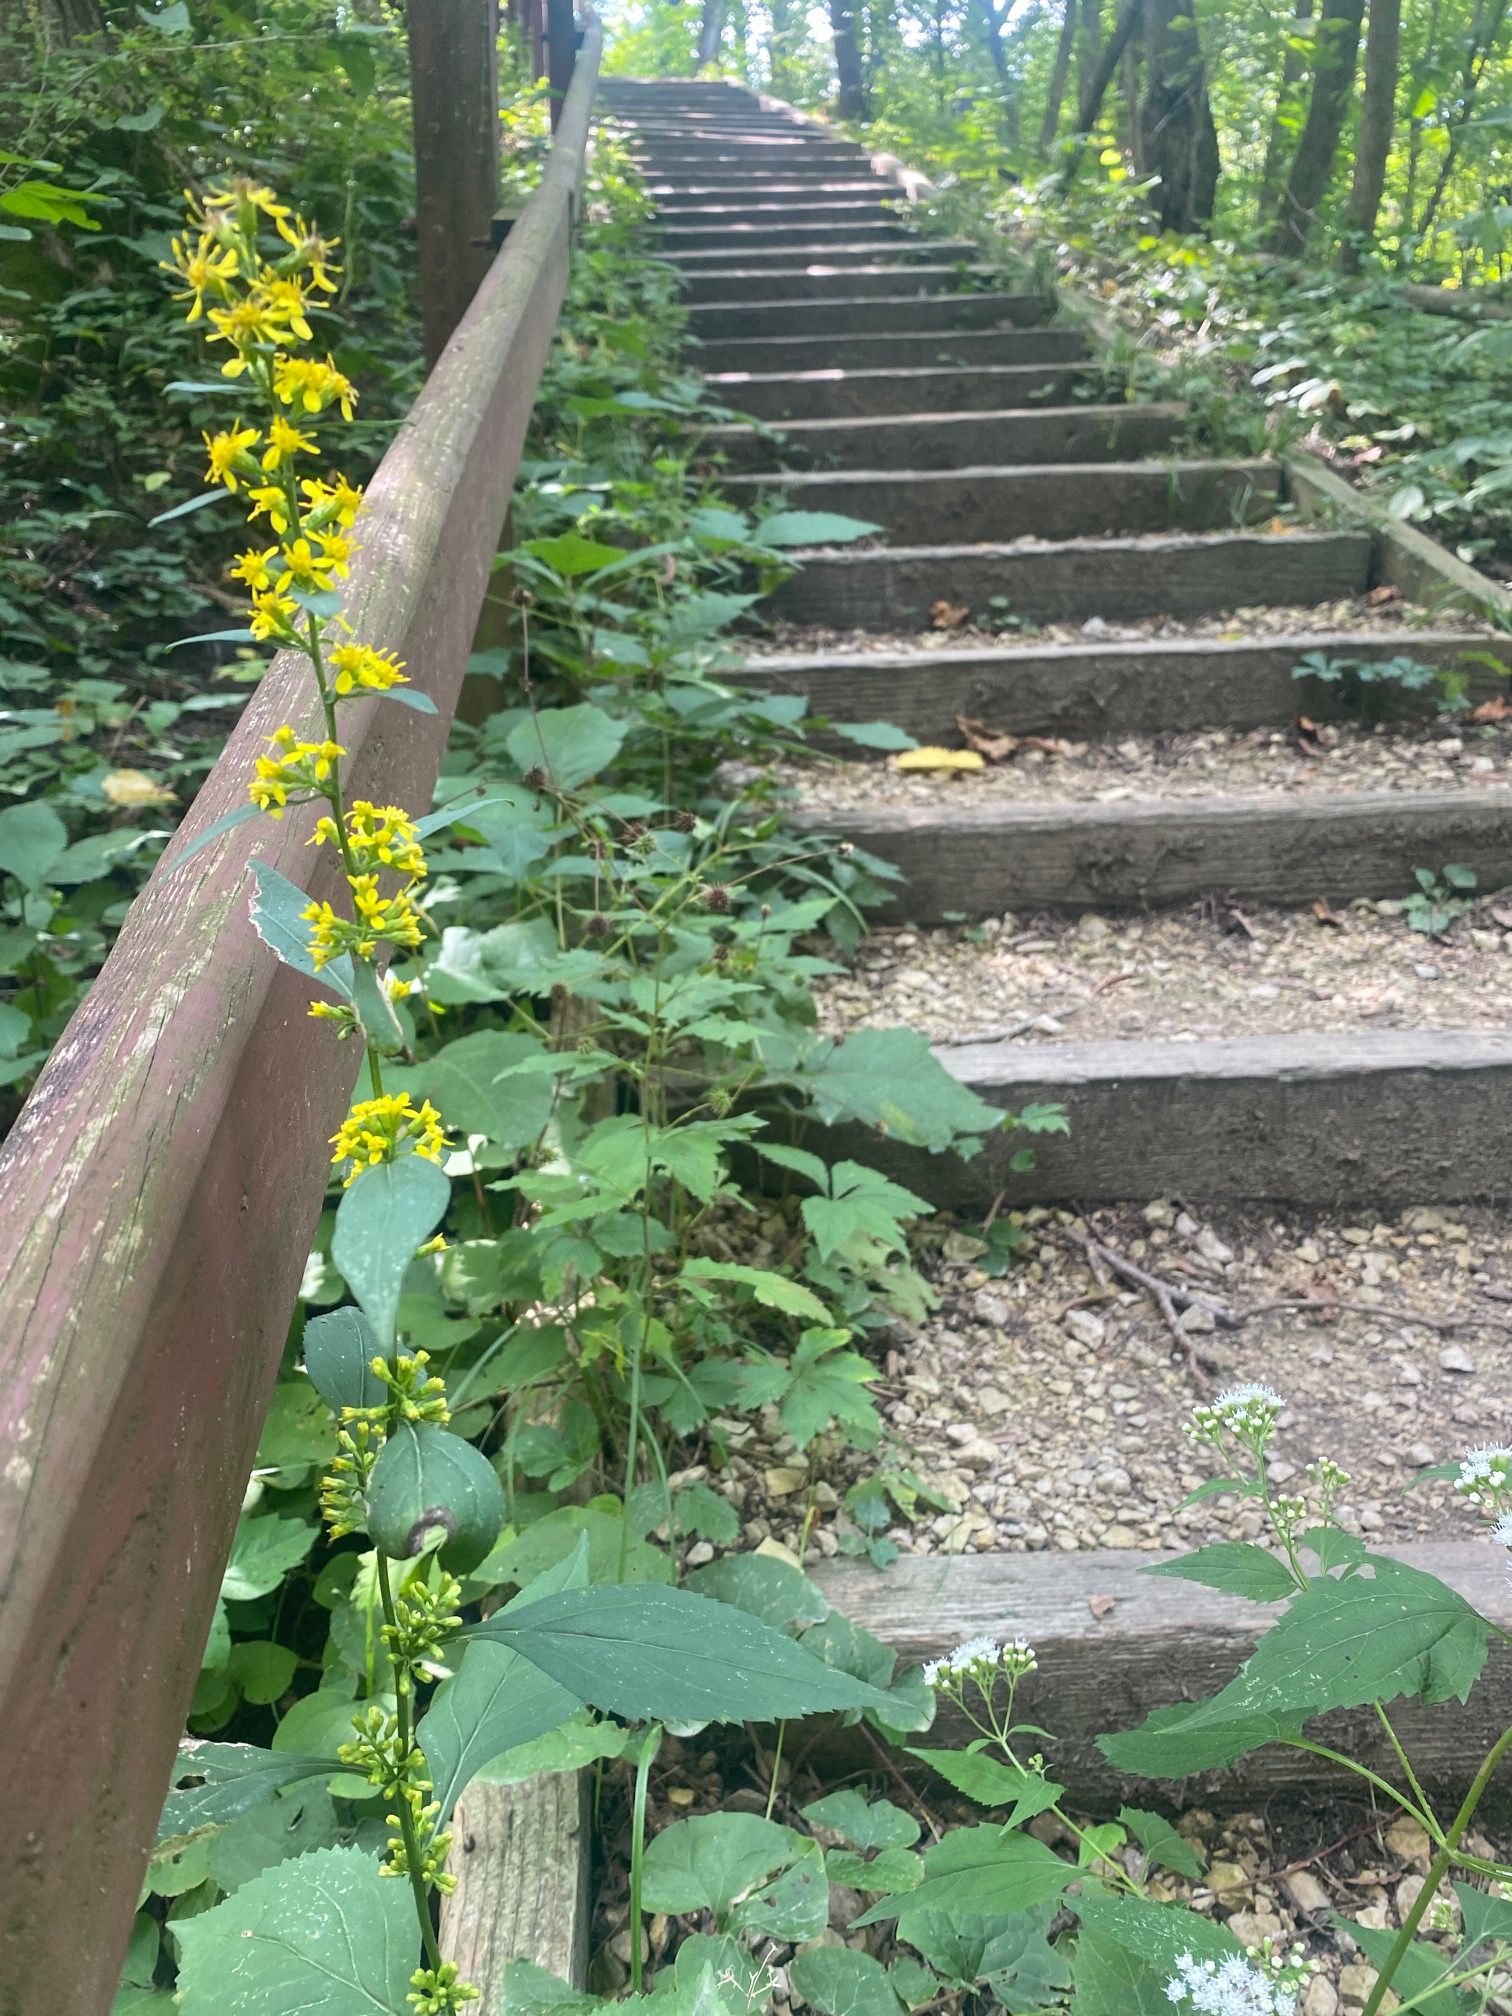 A small strand of yellow bulb shaped flowers wrap around a wooden handrail going up a trail stair case